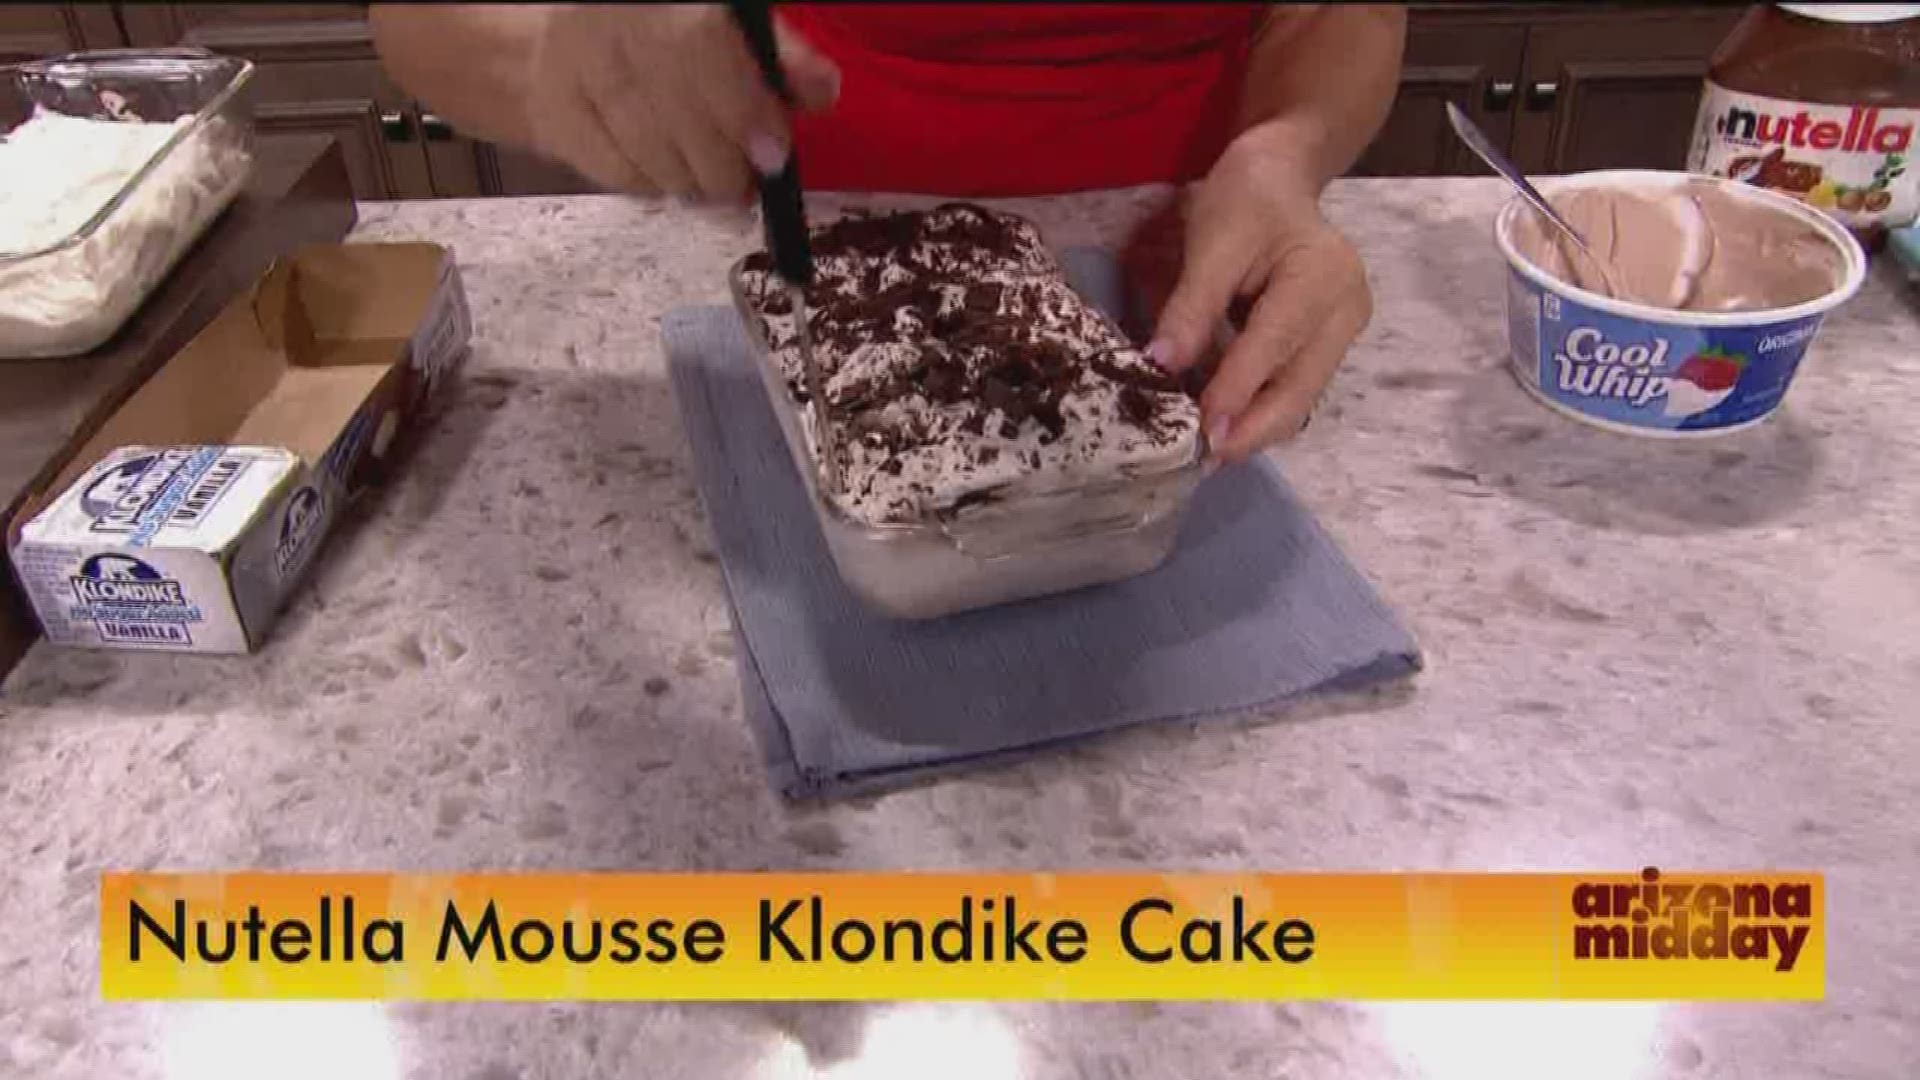 Looking for an easy dessert - Jan's got you covered, especially if you're a fan of chocolate!